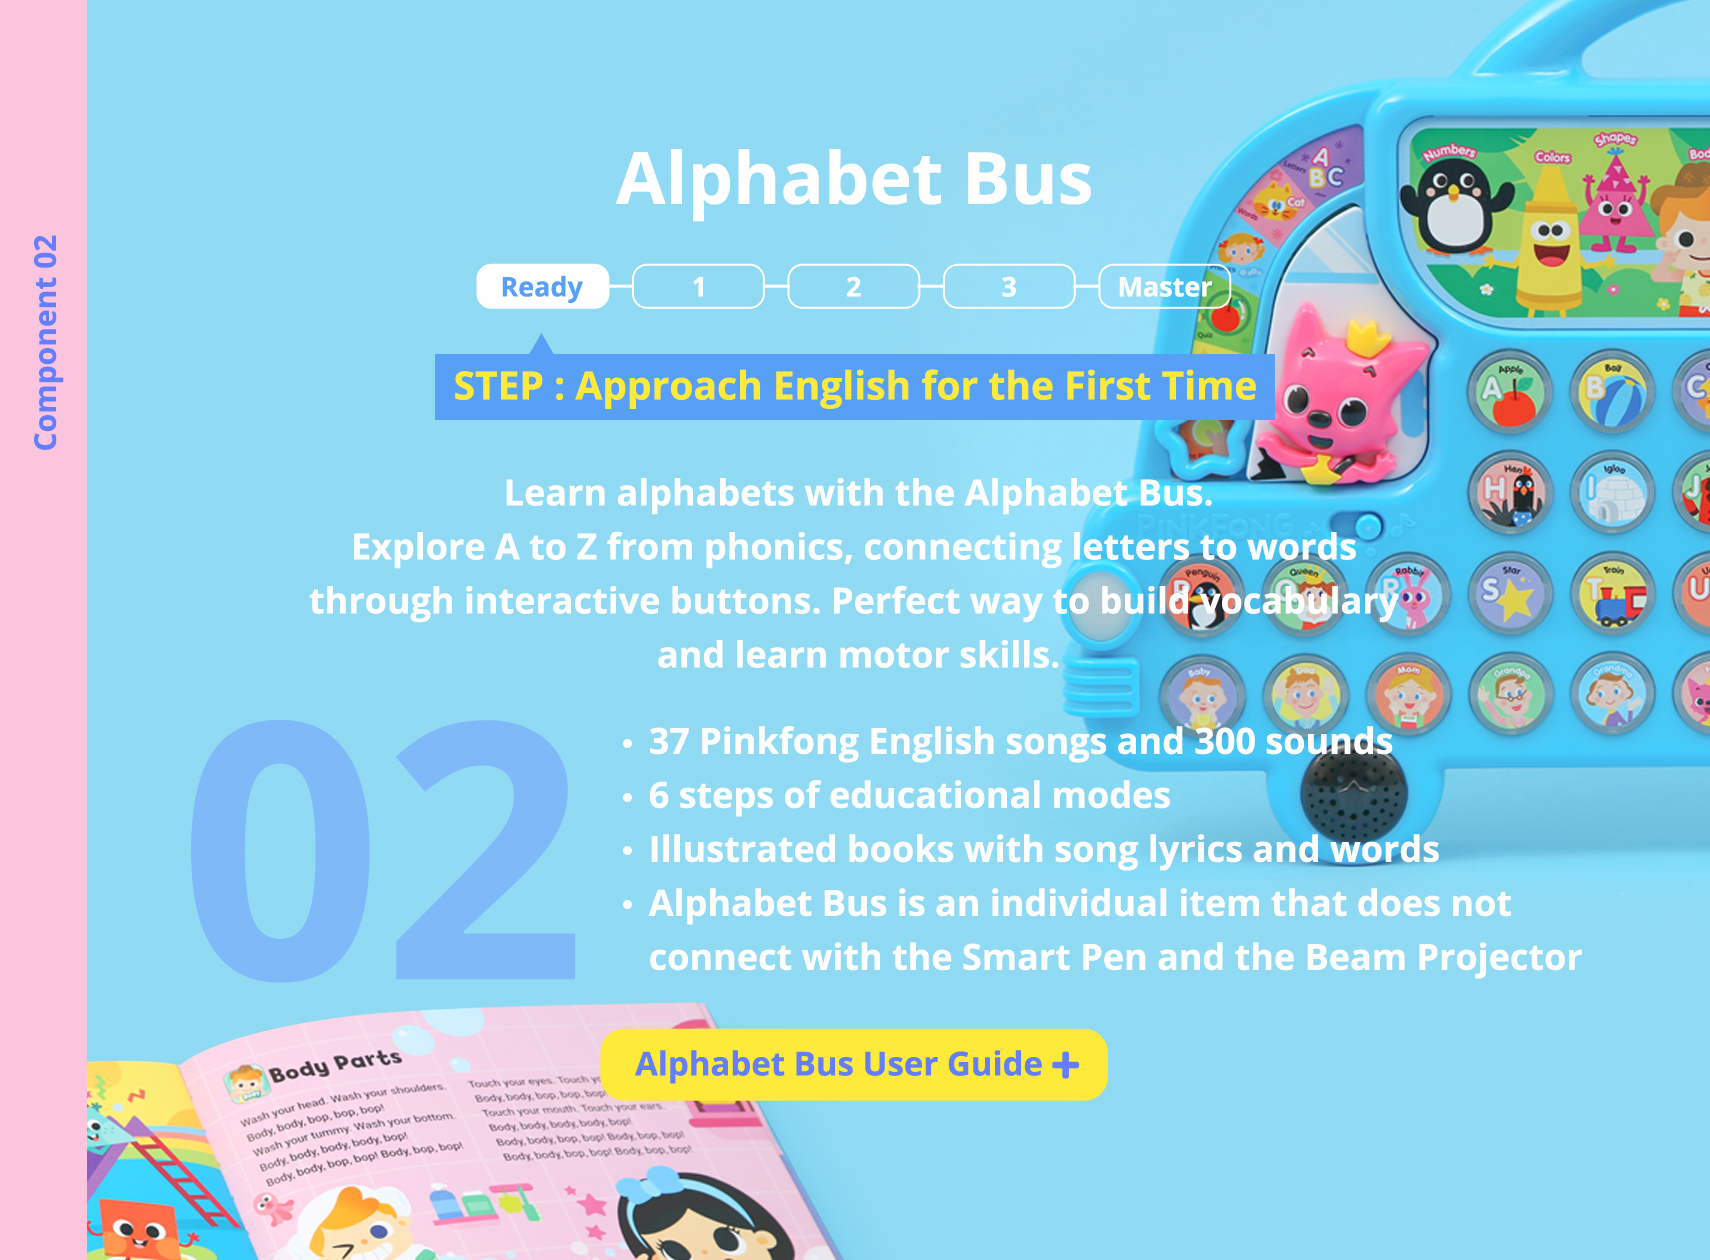 STEP : Approach English for the First Time. Learn alphabets with the Alphabet Bus. Explore A to Z from phonics,  letters to words through interactive buttons. Perfect way to build vocabulary and learn motor skills.